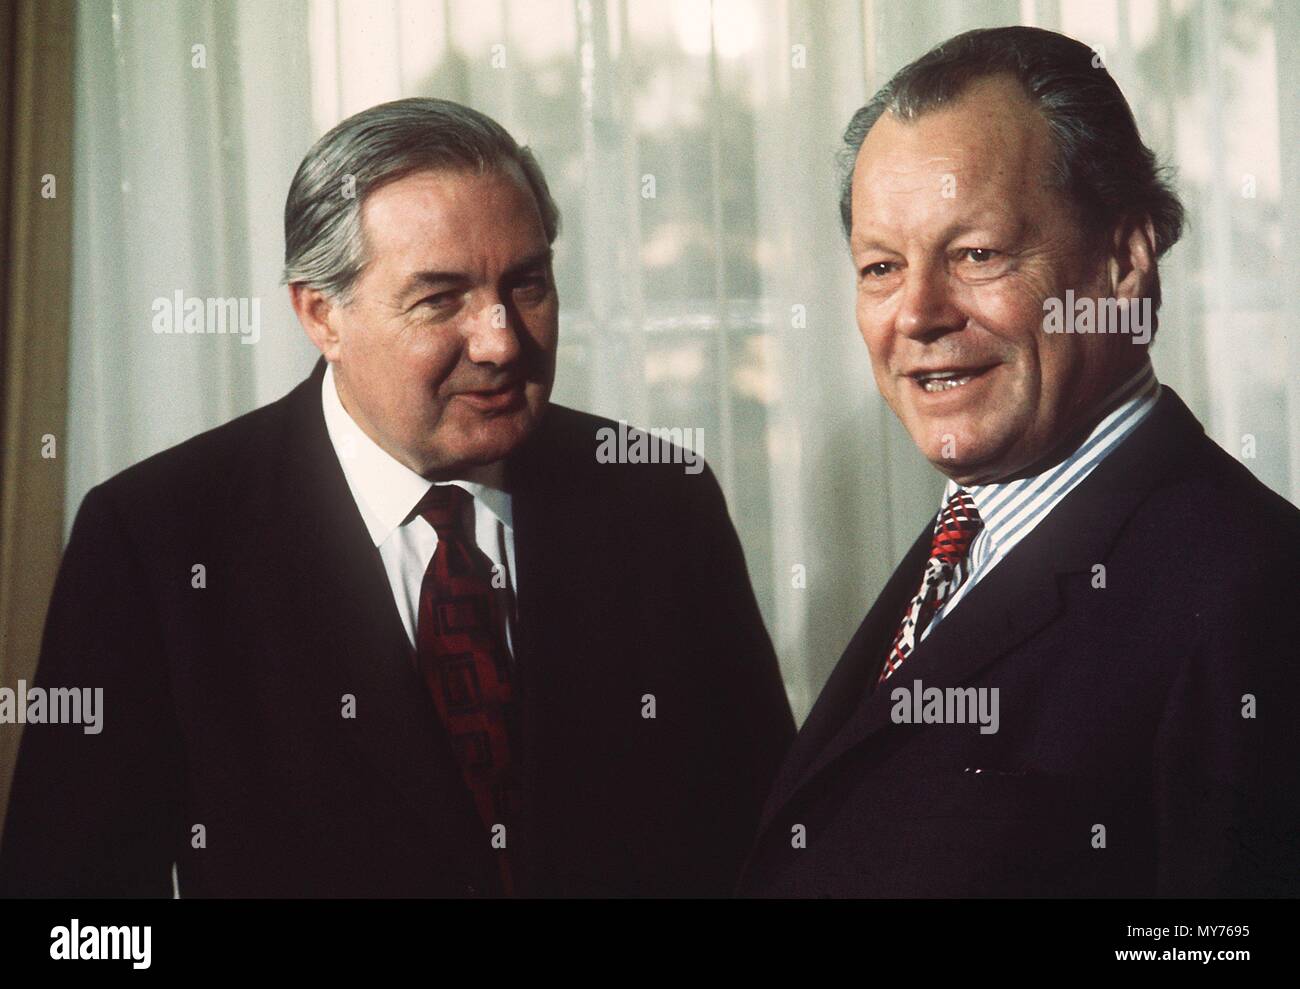 British Foreign Minister James Callaghan meets with German Chancellor Willy Brandt during his visit to the Federal Republic of Germany, in the chancellor's office in Bonn, Germany, in March 1974    | usage worldwide Stock Photo